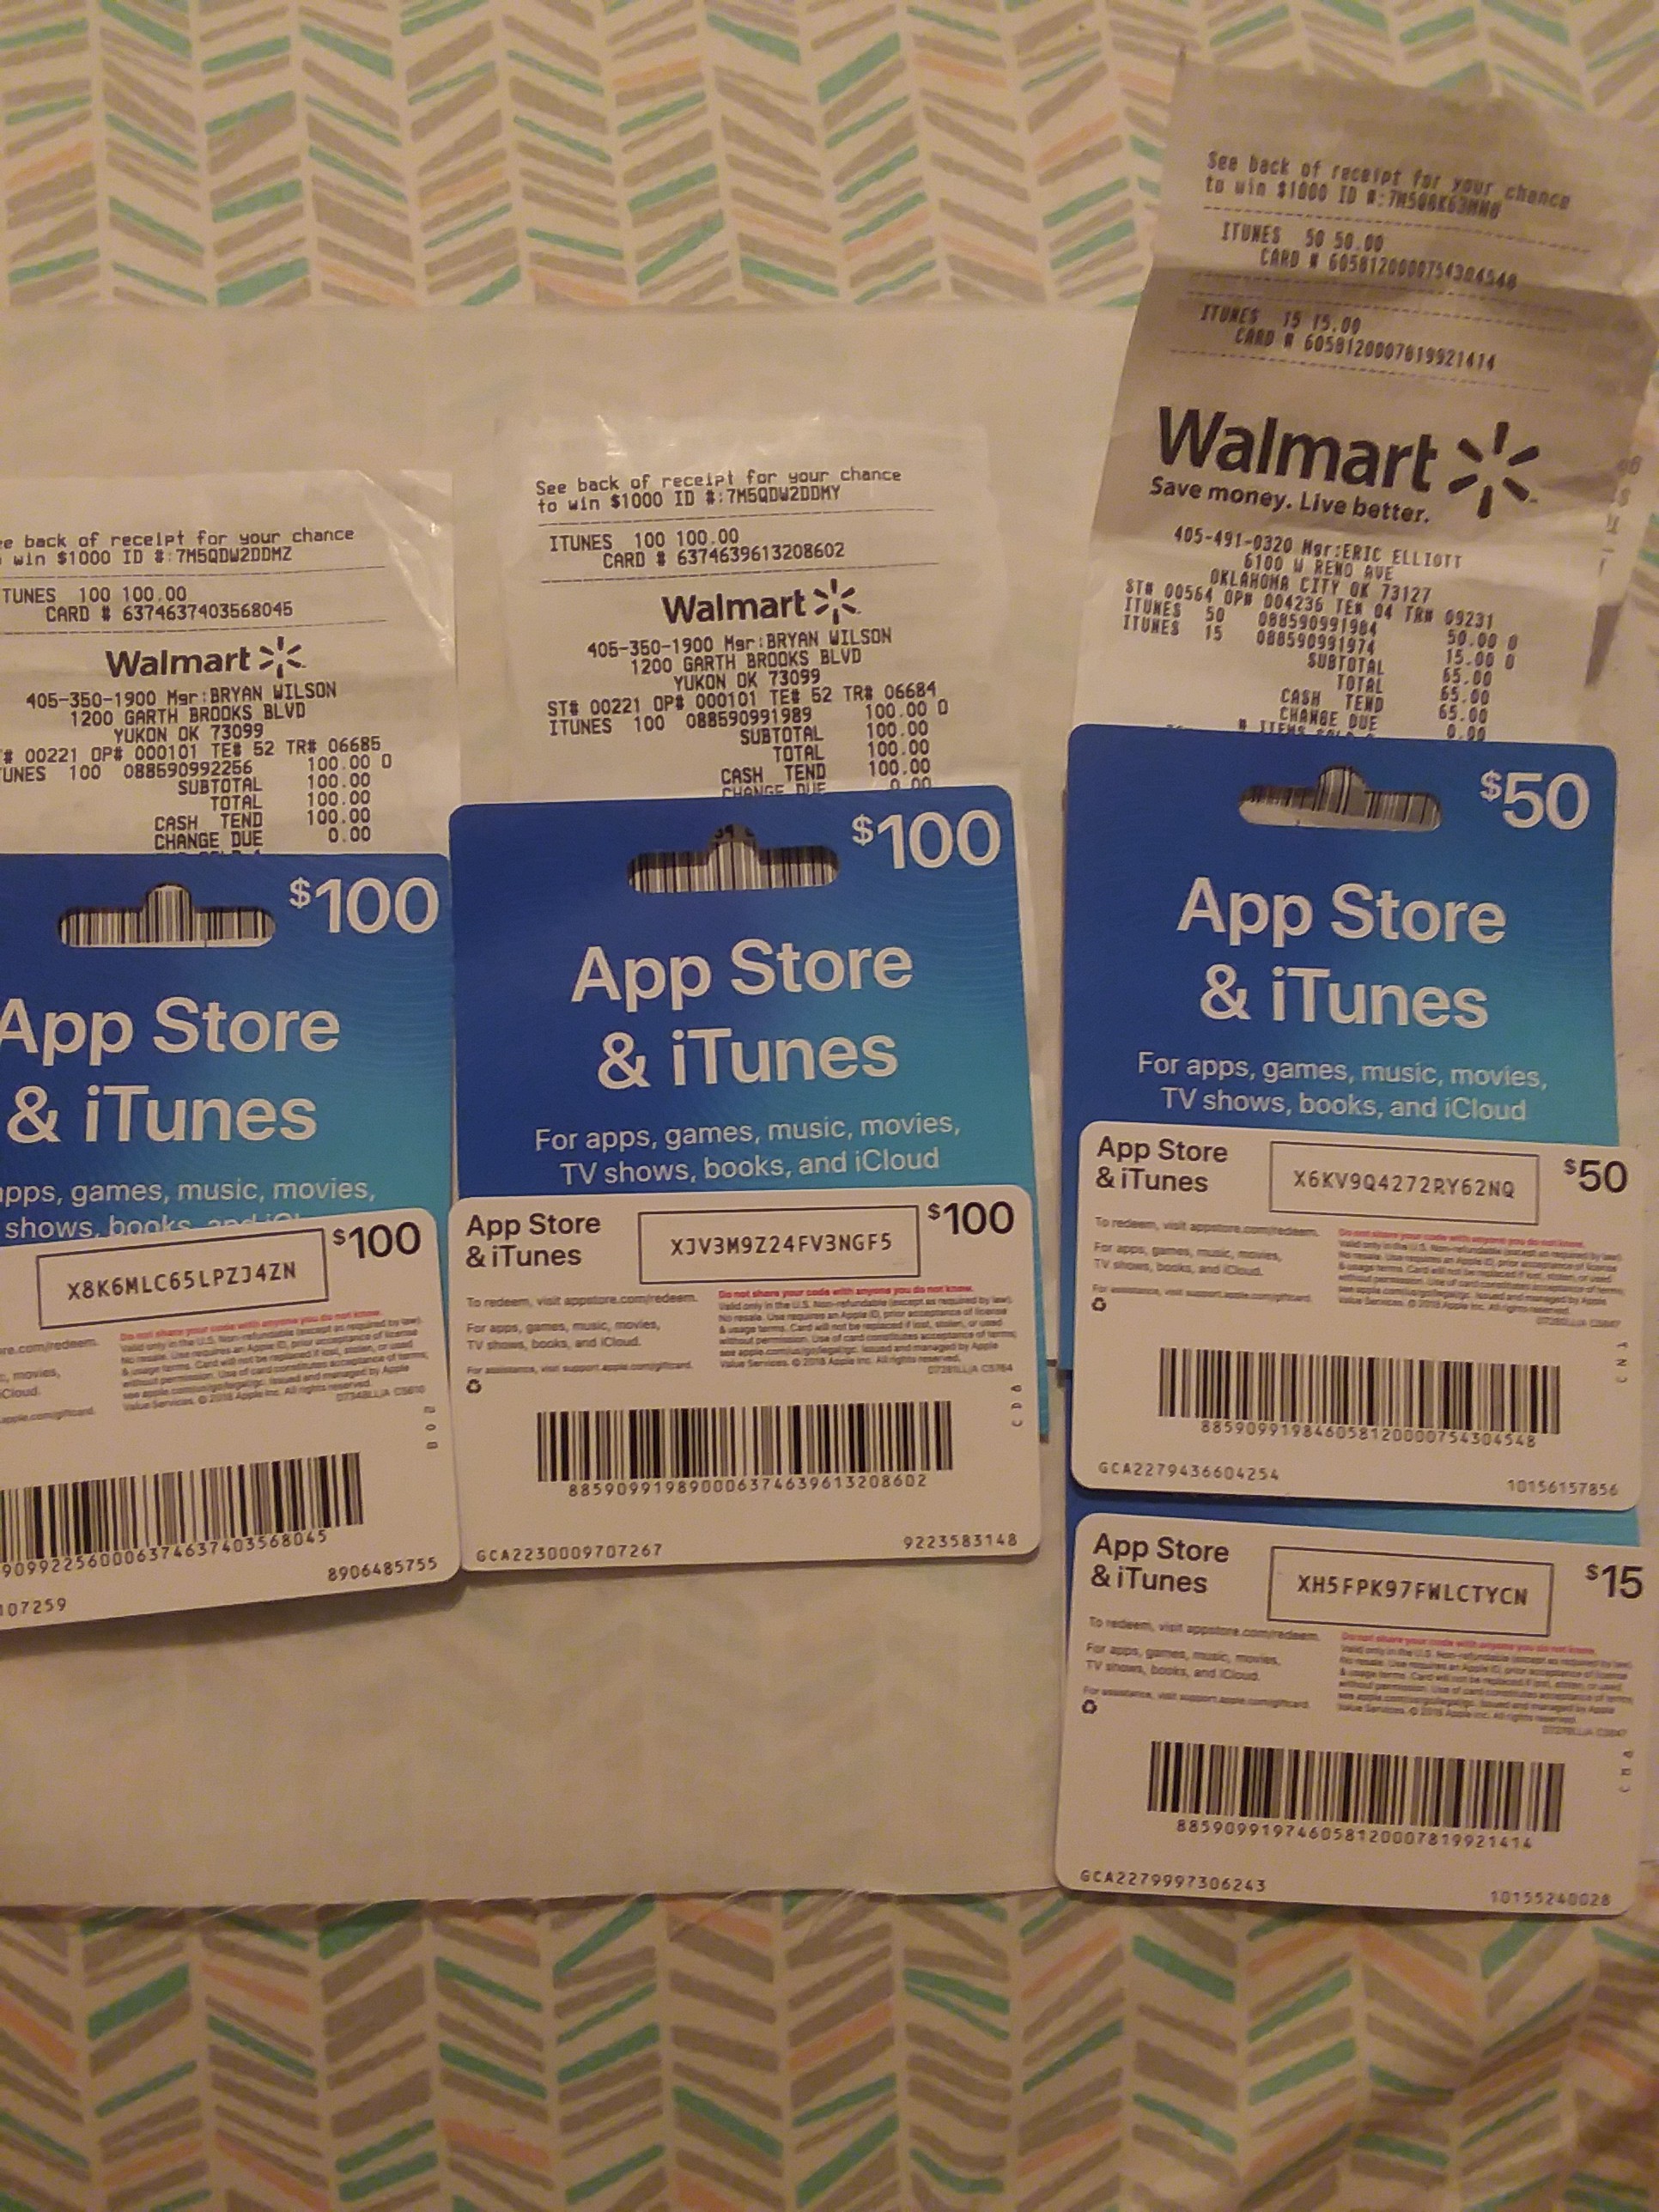 refunds-on-my-cards-i-buy-from-walmart-apple-community